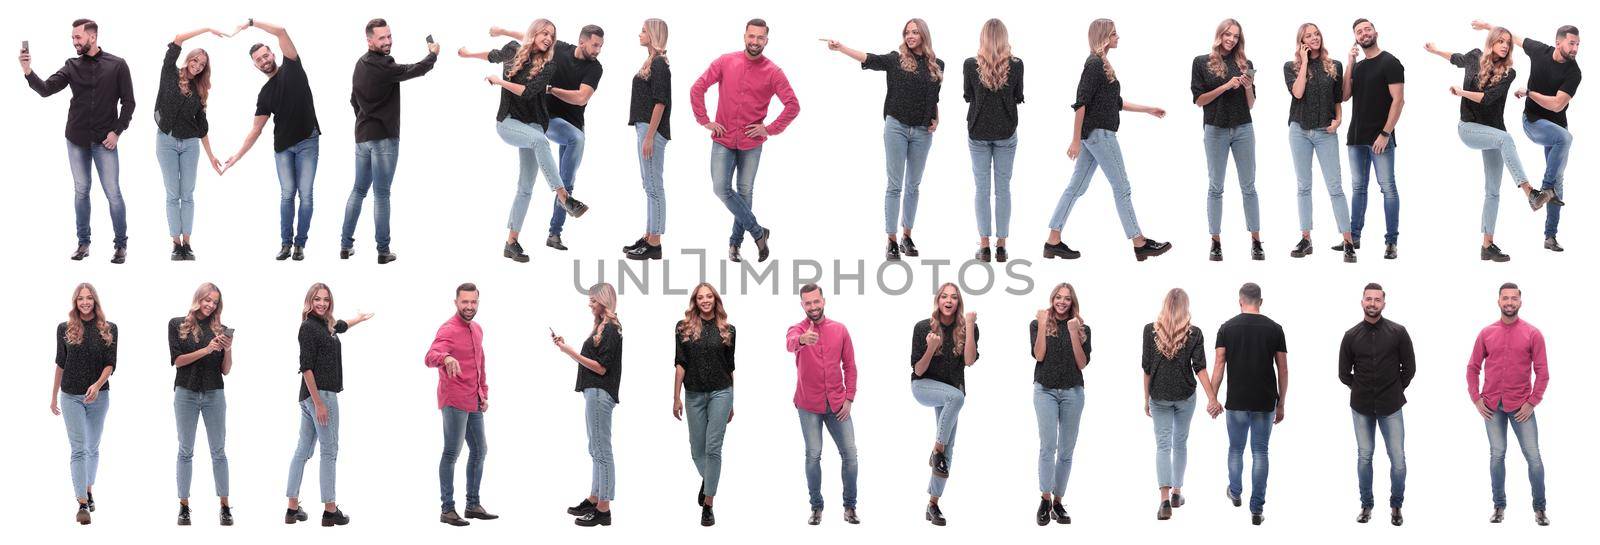 collage of photos of diverse young people. isolated on a white background